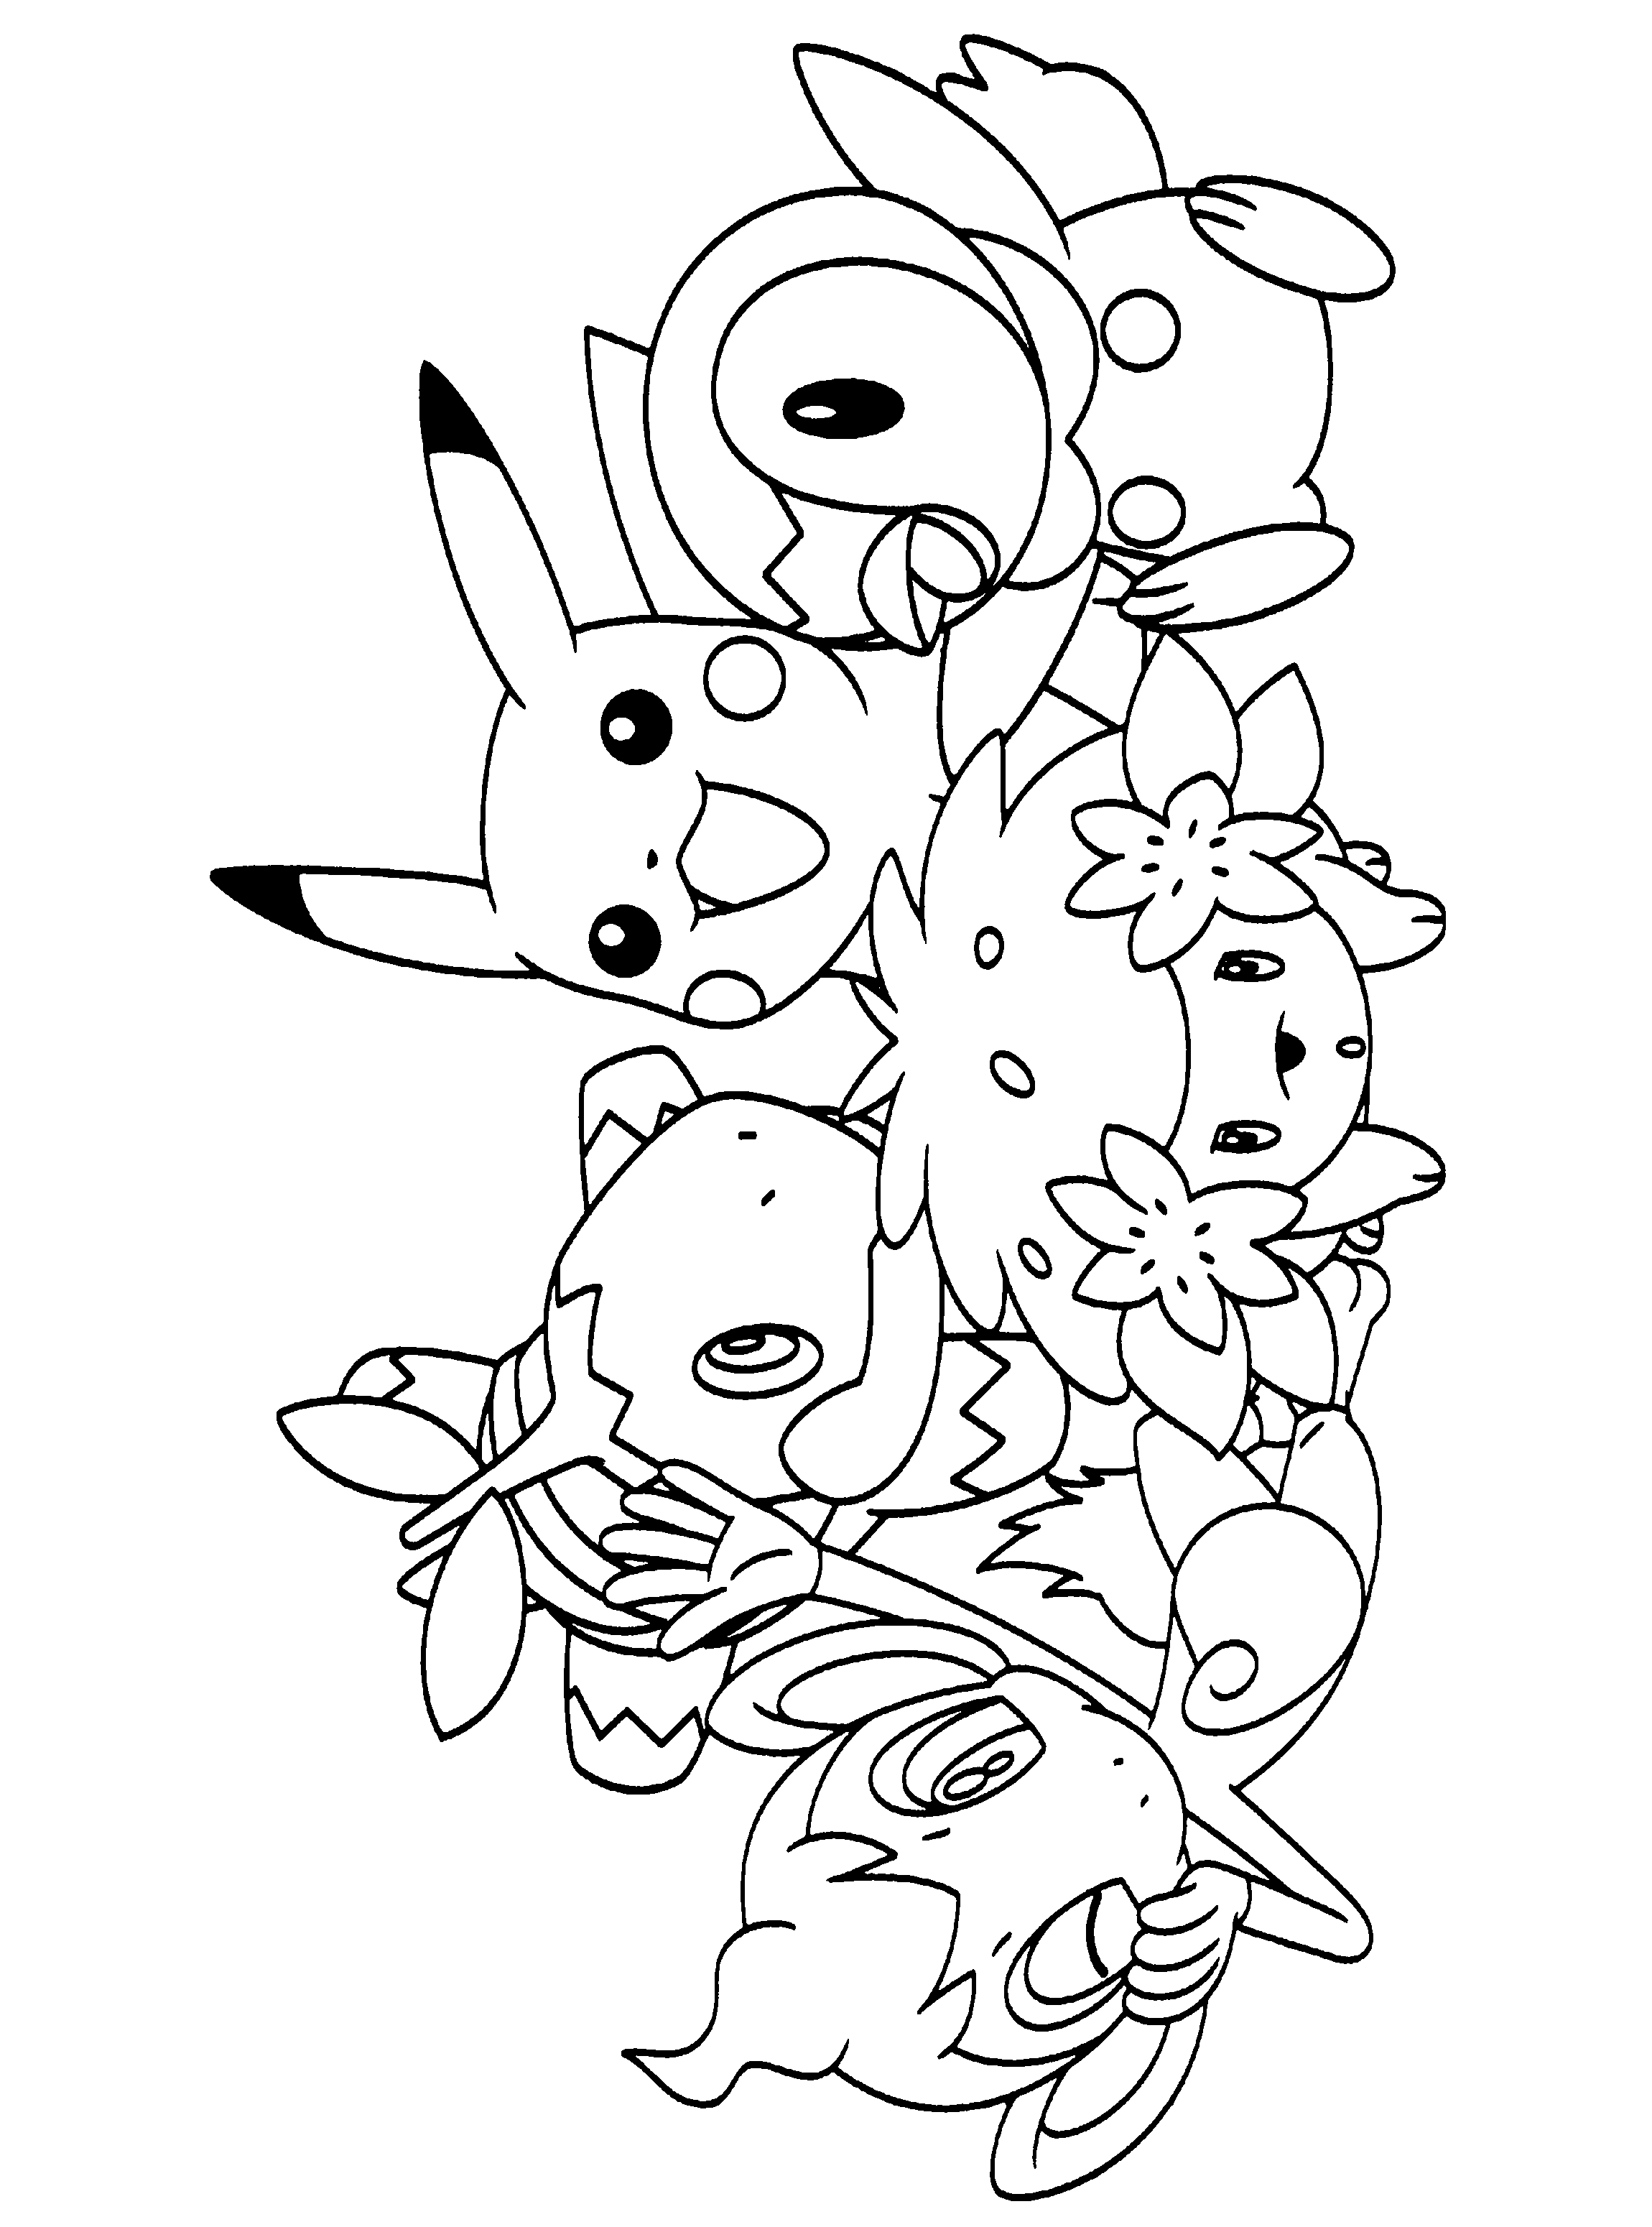 coloring-page-pokemon-coloring-pages-54